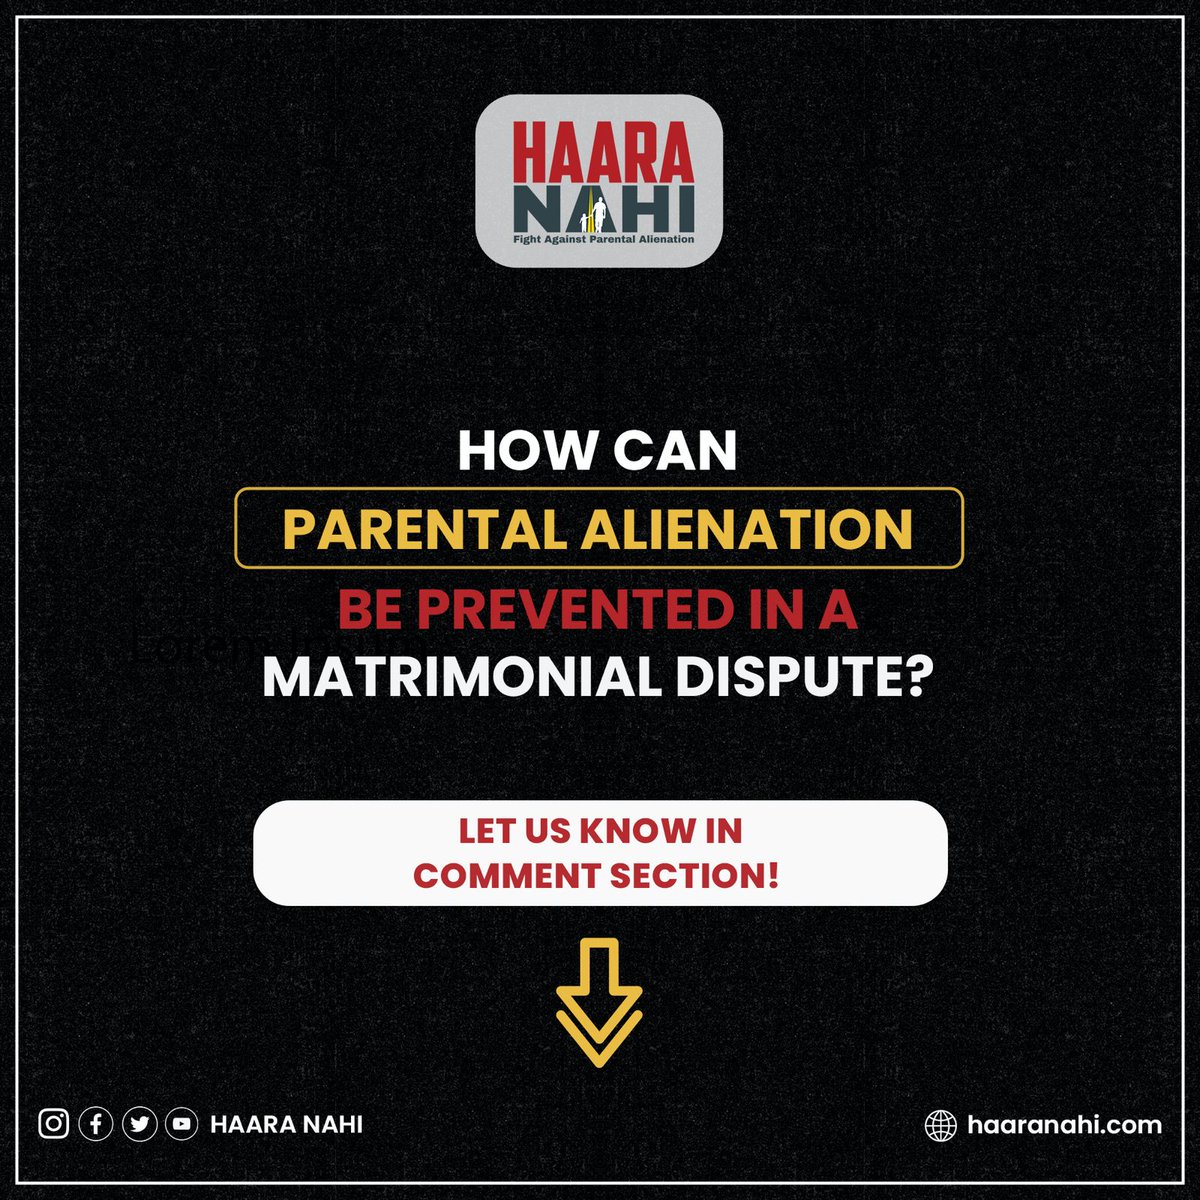 How can parental alienation be prevented in a matrimonial dispute?
 Let us know in comment section!
#parentalalienationawareness #stopparentalalienation #matrimonialdispute #parentalalienationsyndrome #parentalalienationisabuse #haaranahi